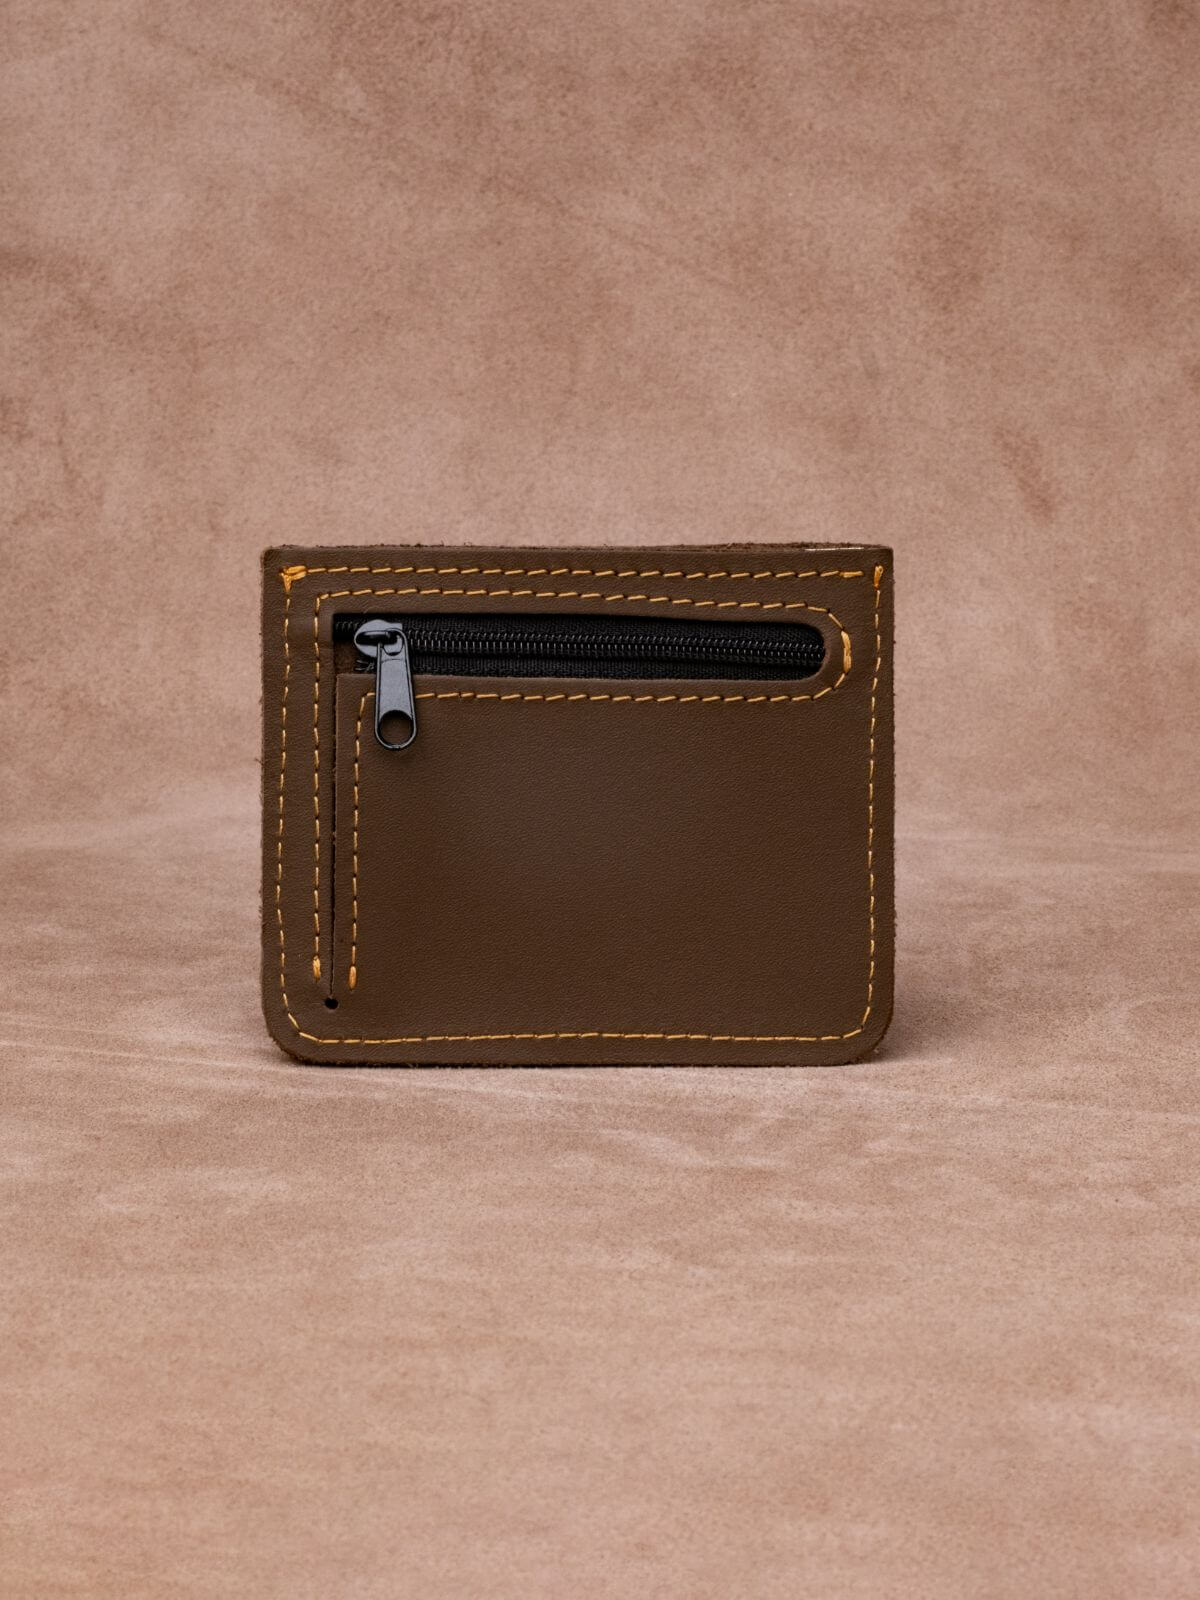 leather holder for card 